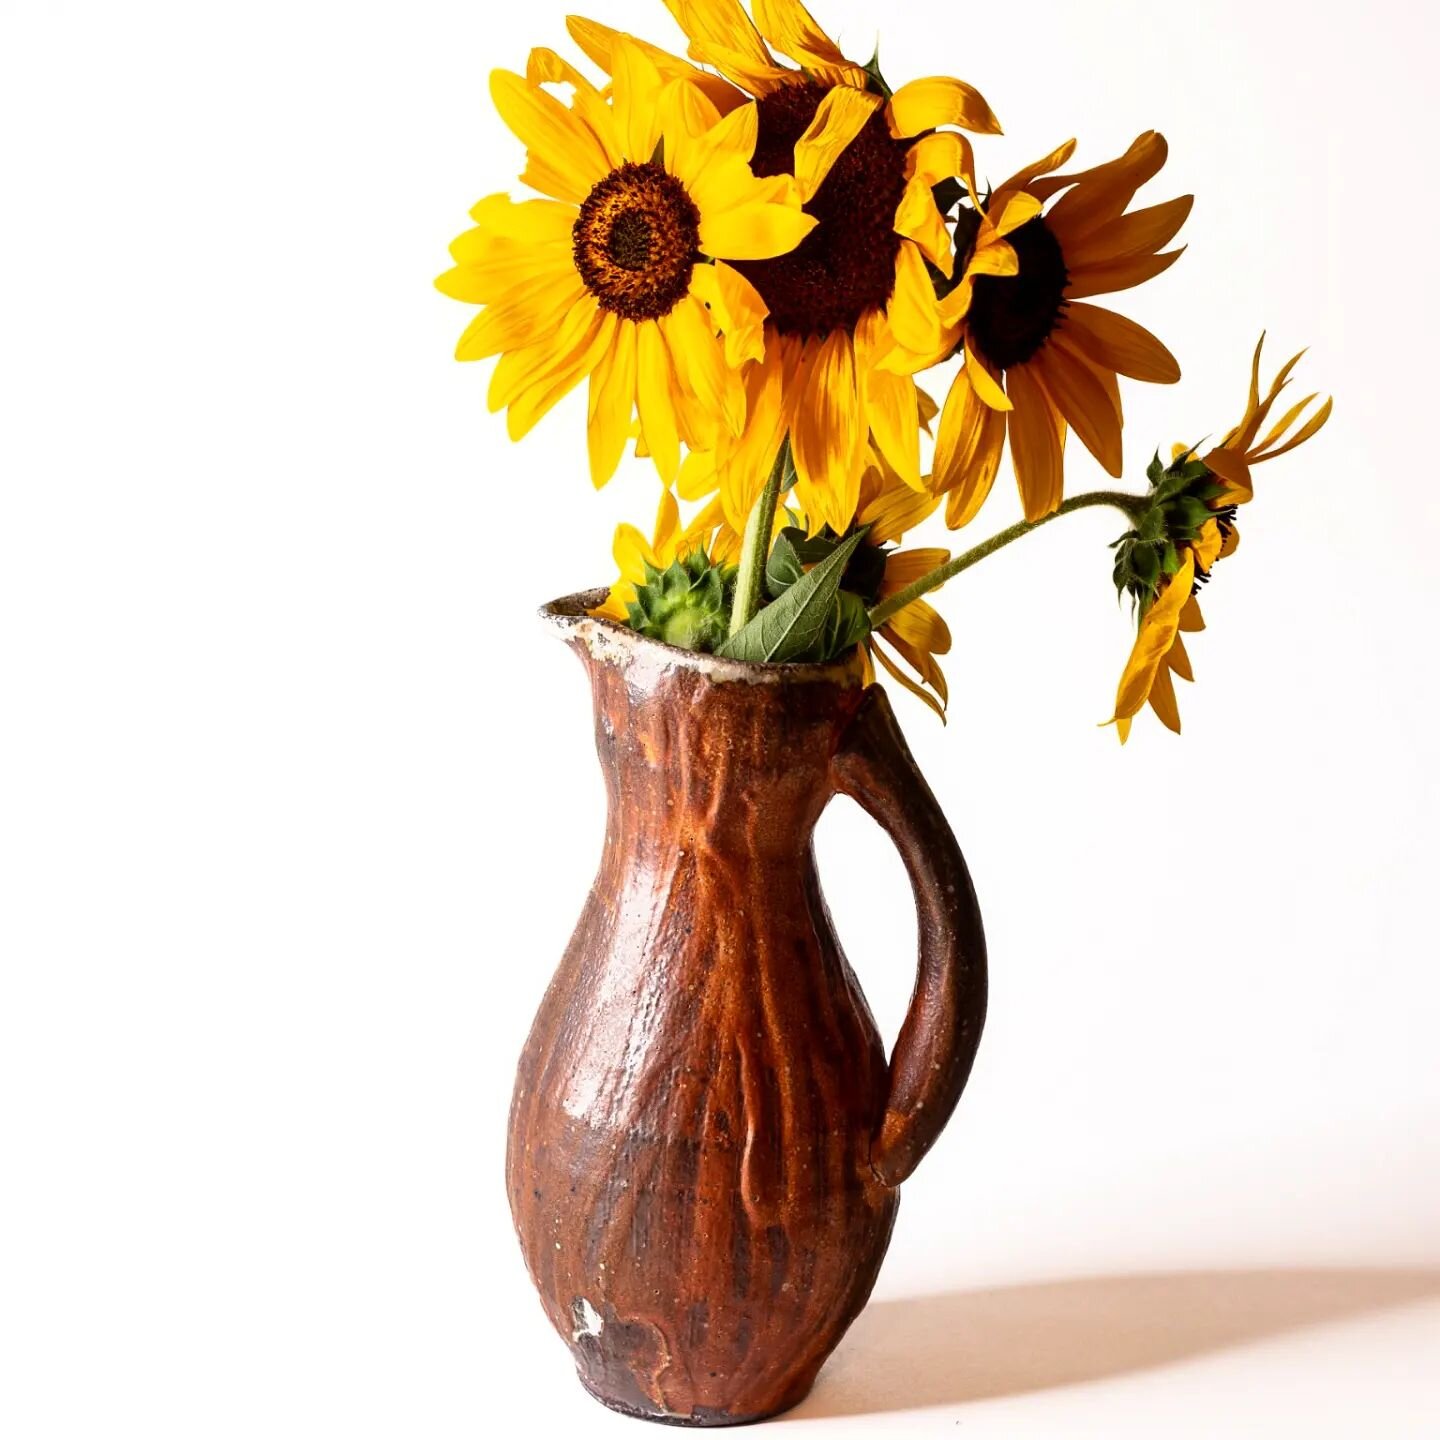 It may feel like sunflower season out here now, but the holidays are coming up! Join us at 2514 University Drive this weekend to pick up some pottery for gifts and for your self. 

We're just one stop on the @durhamcountypotterytour; be sure to check